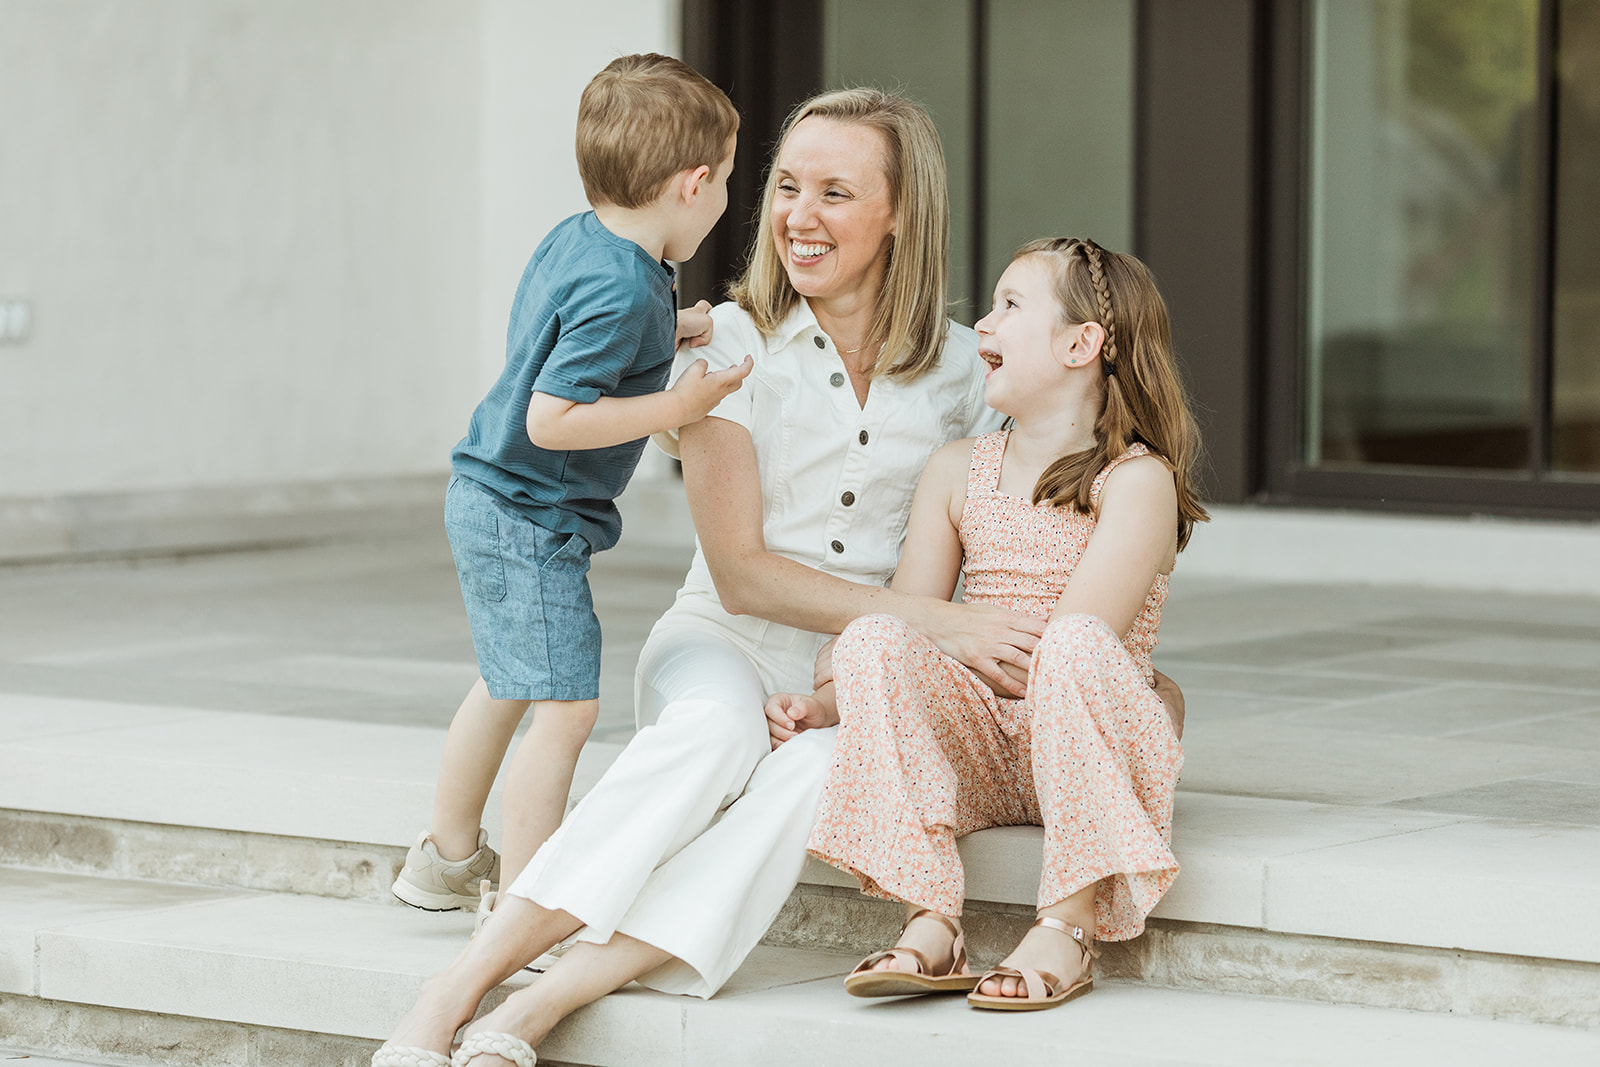 outdoor in-home family session in nashville tennessee. mom with two kids